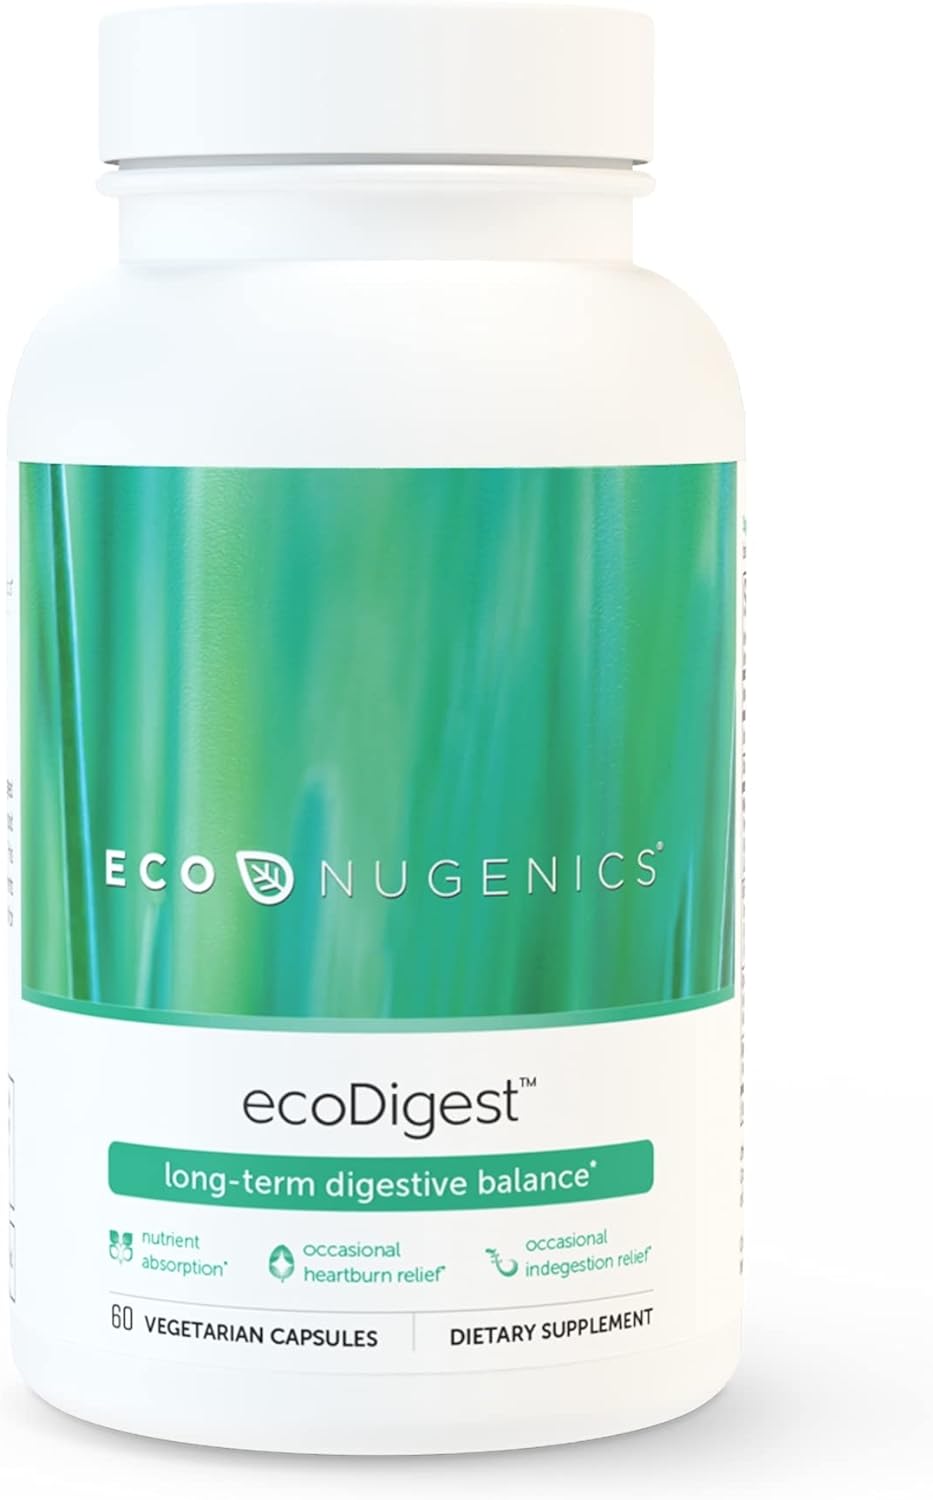 EcoNugenics EcoDigest Digestive Health Supplement - 60 Capsules- Digestive Support - Herbs, Medicinal Mushrooms & Enzymes